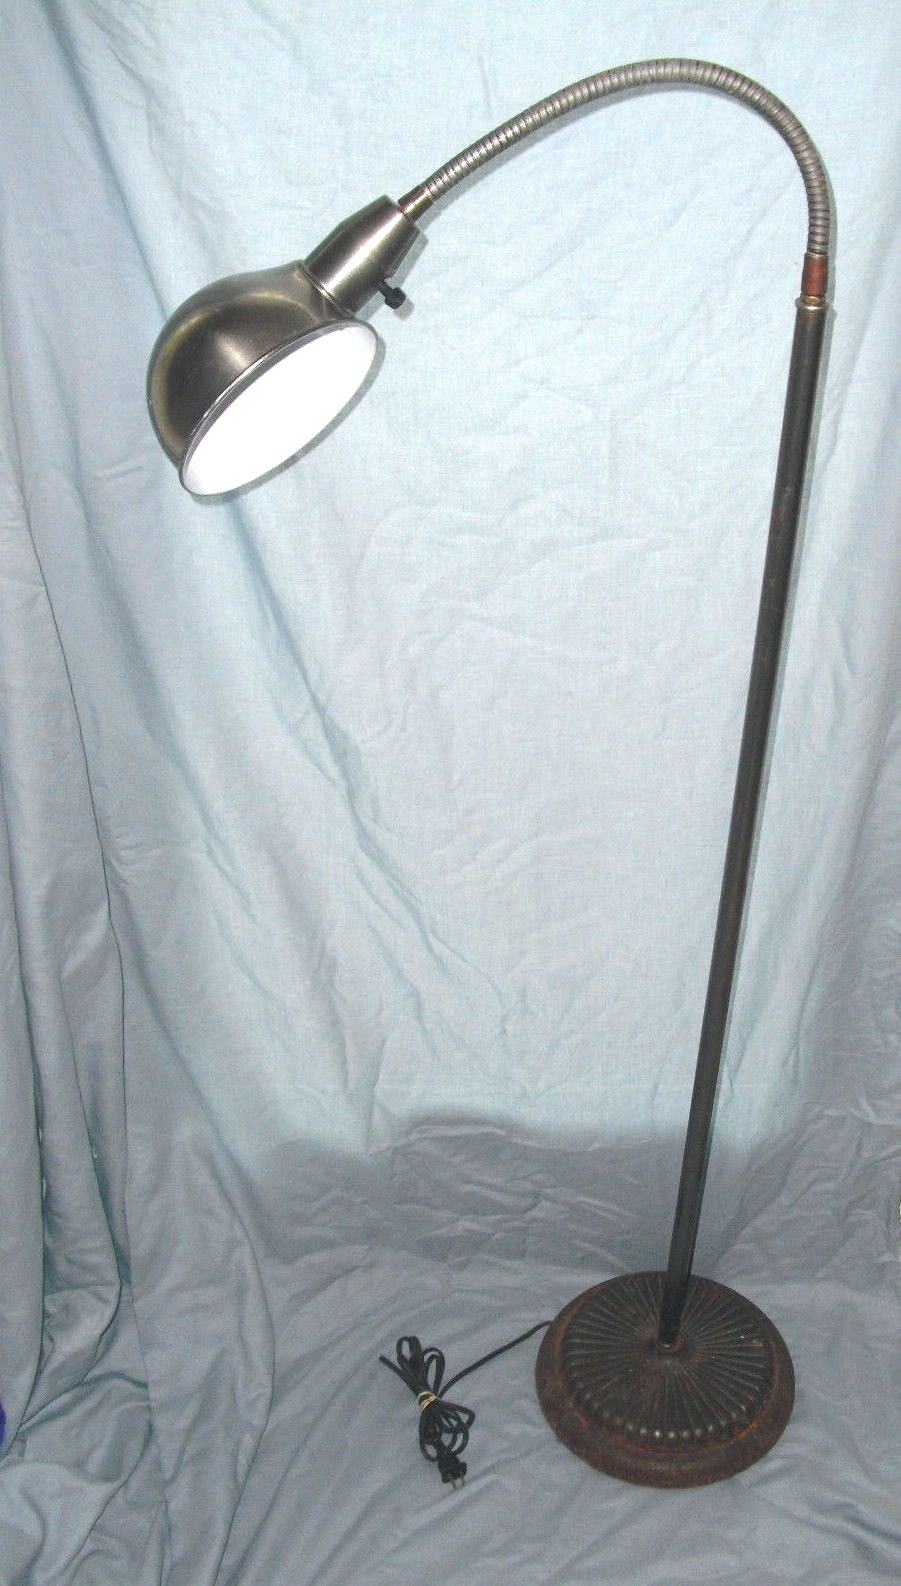 Placed Gooseneck Floor Lamp Disacode Home Design From with sizing 901 X 1586